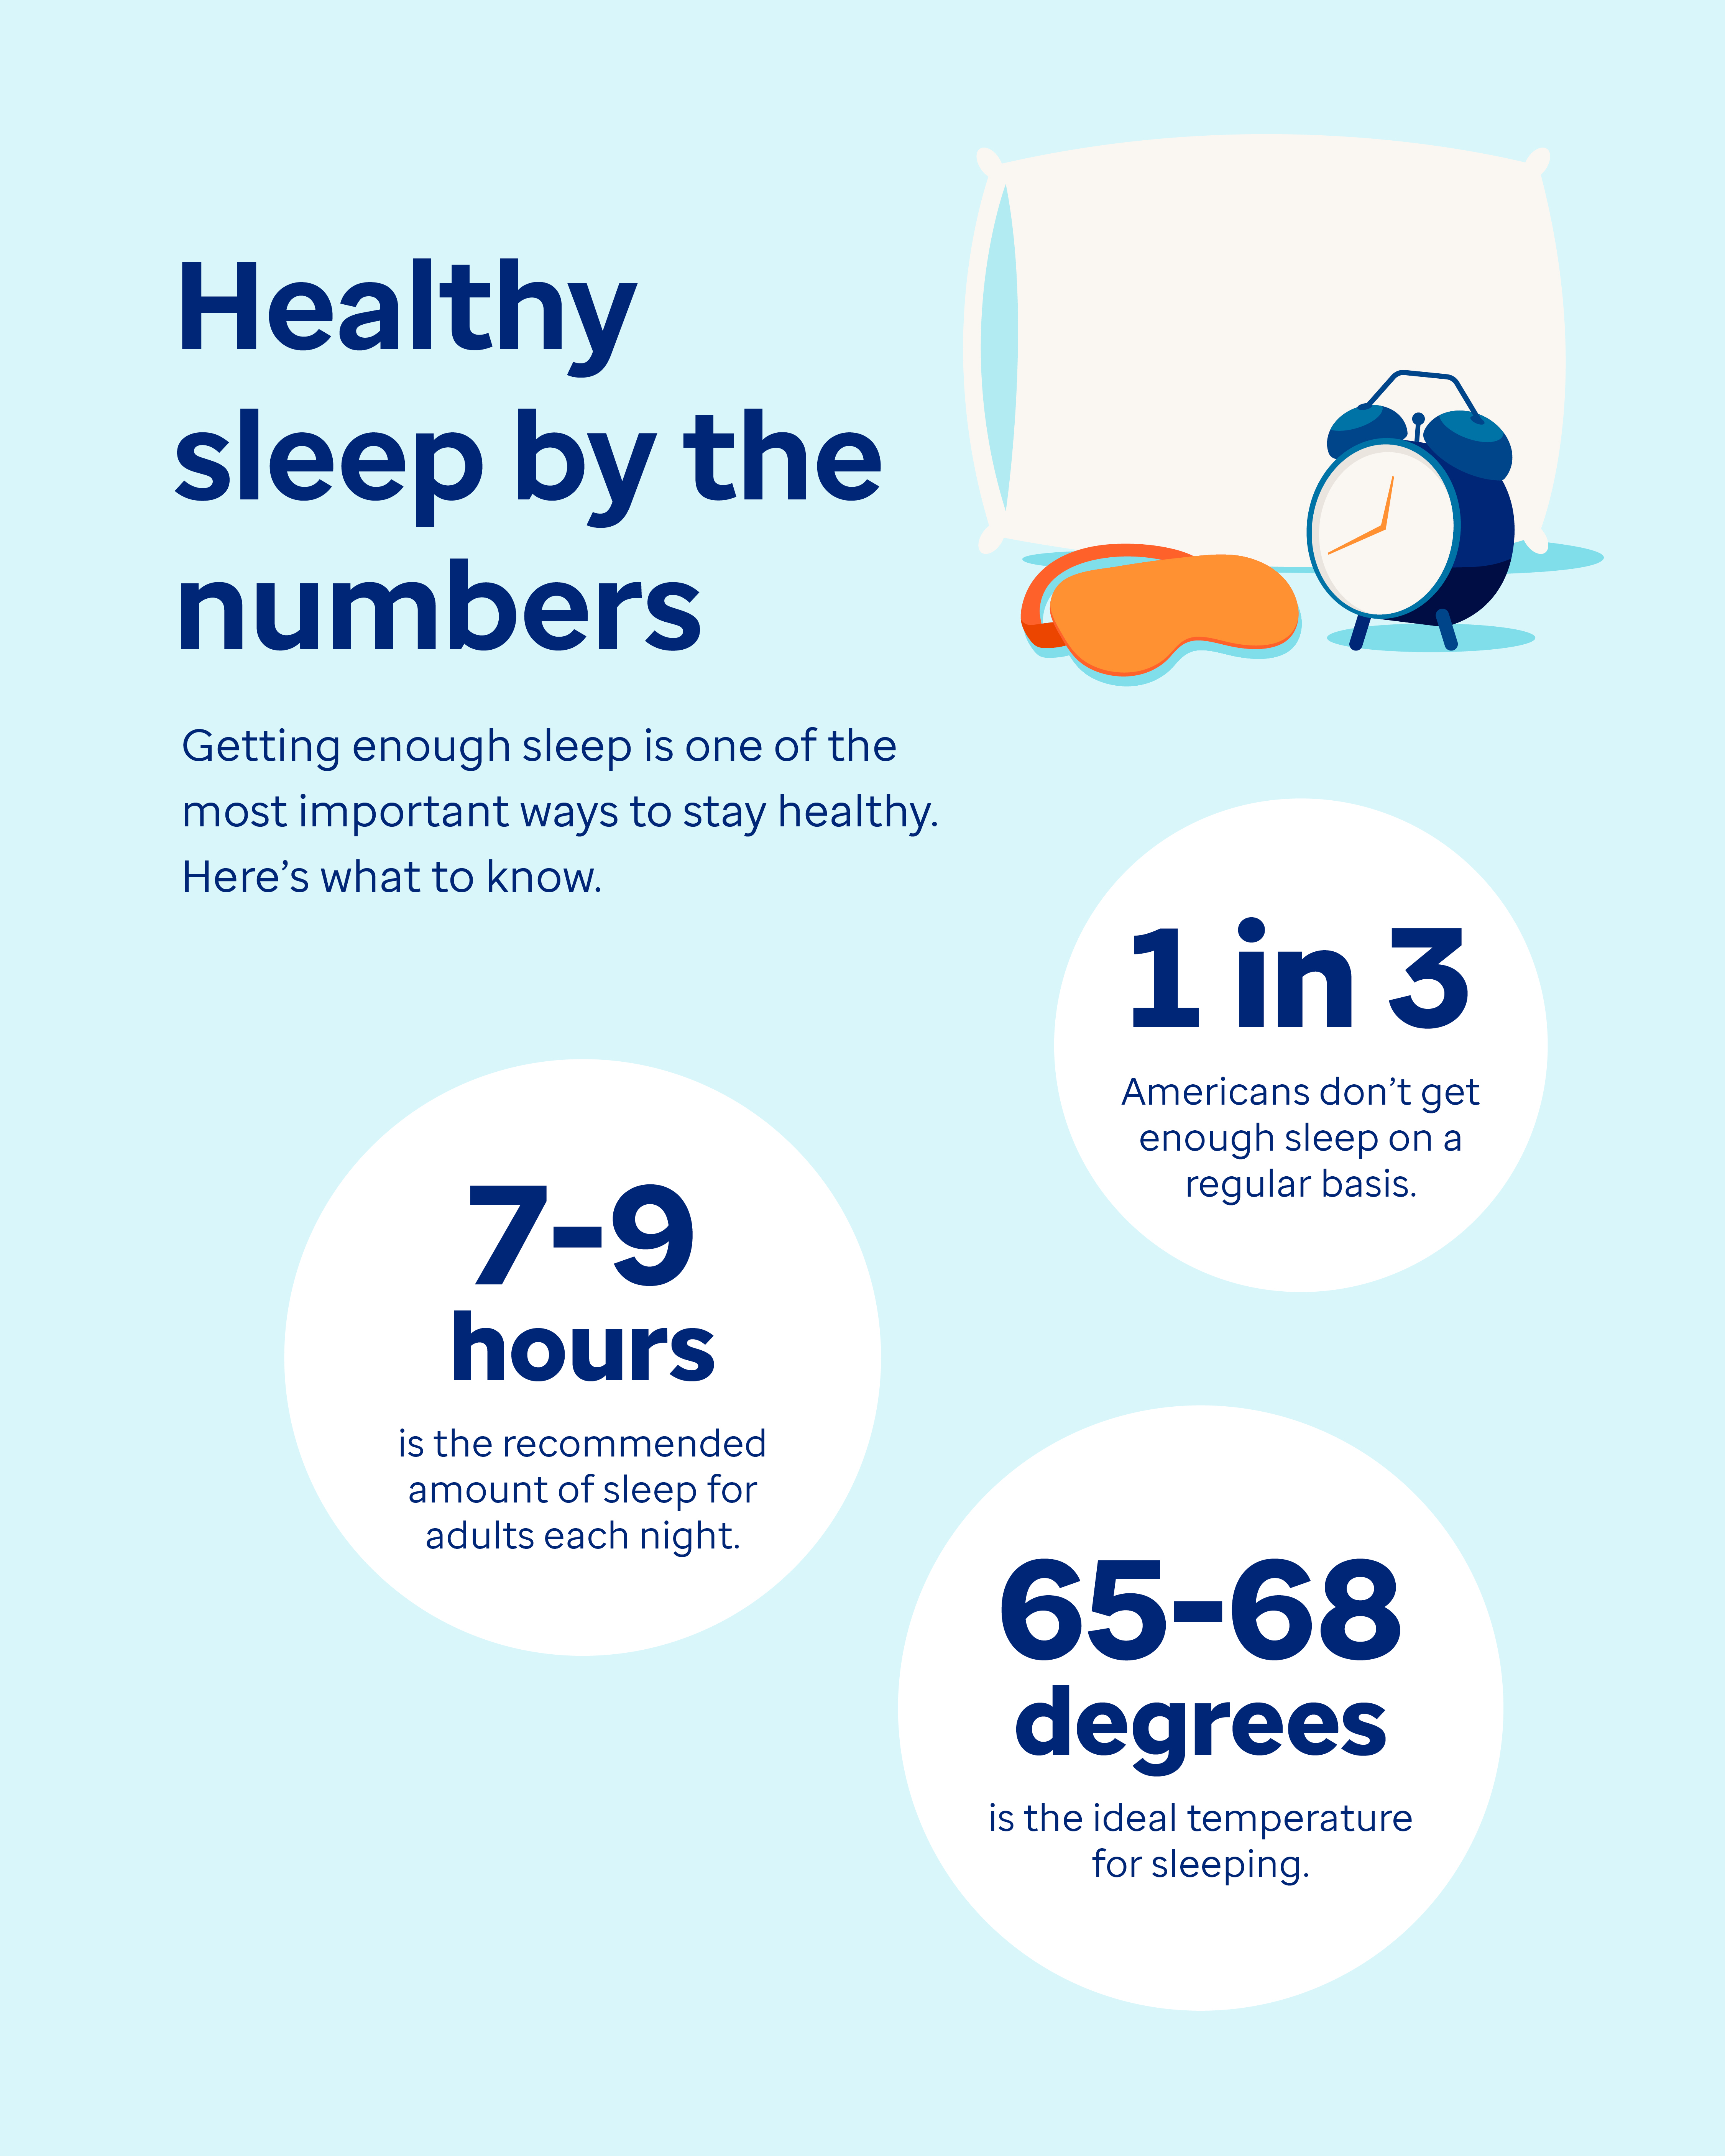 Healthy sleep by the numbers